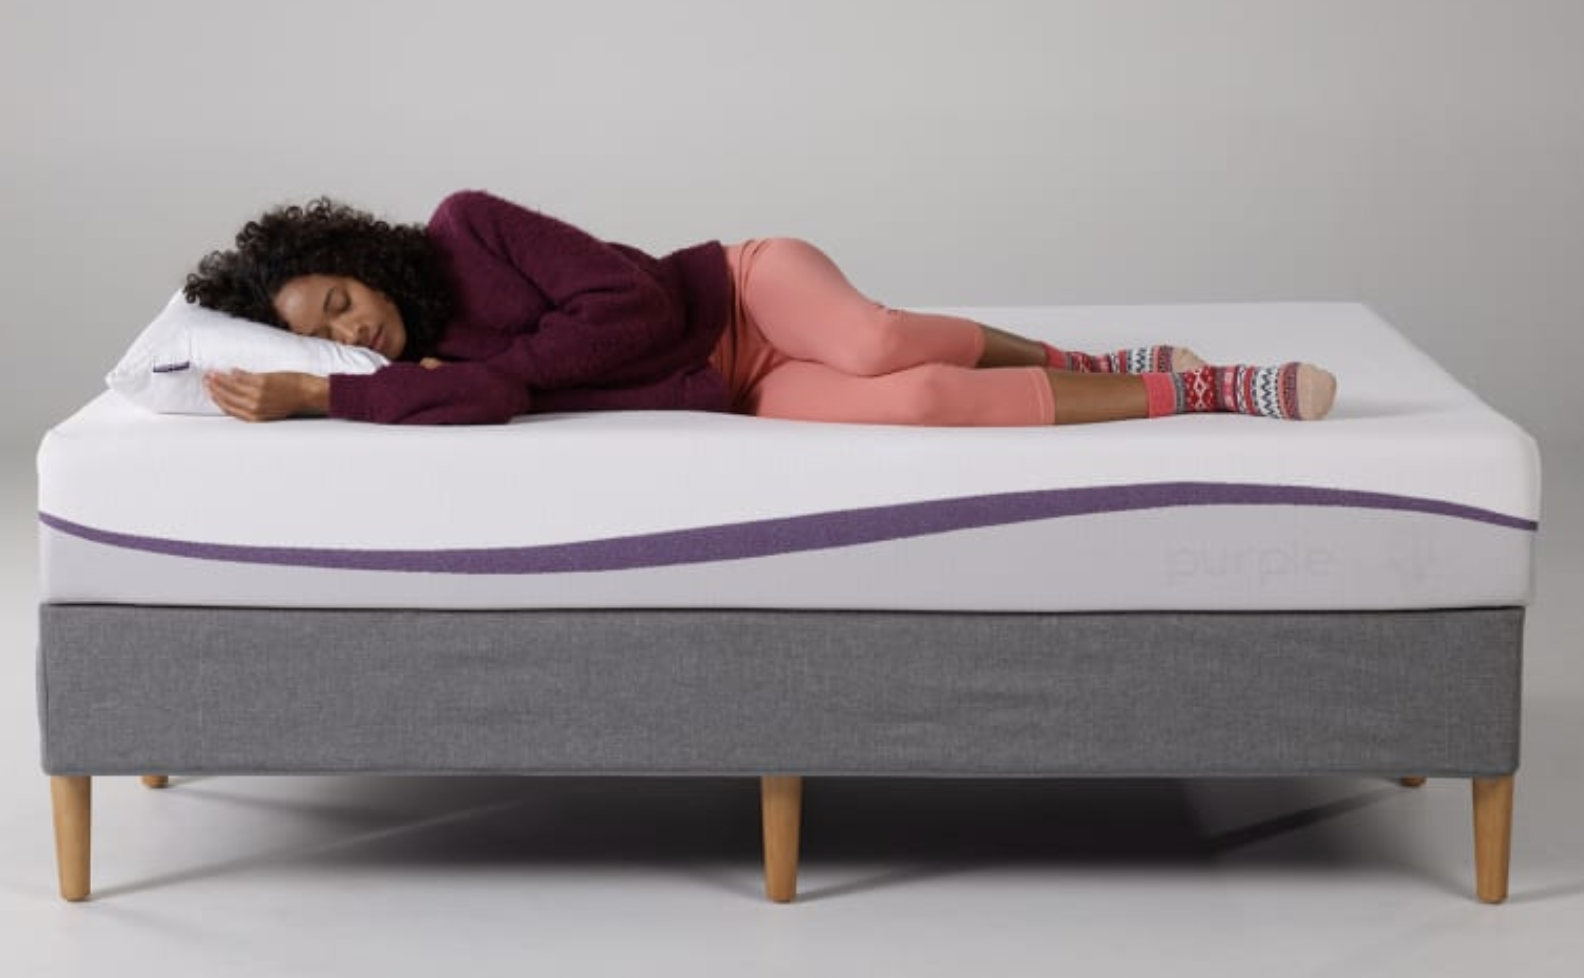 19 Best Mattresses For Back Pain 2022, Best Bed In A Box For Back And Neck Pain